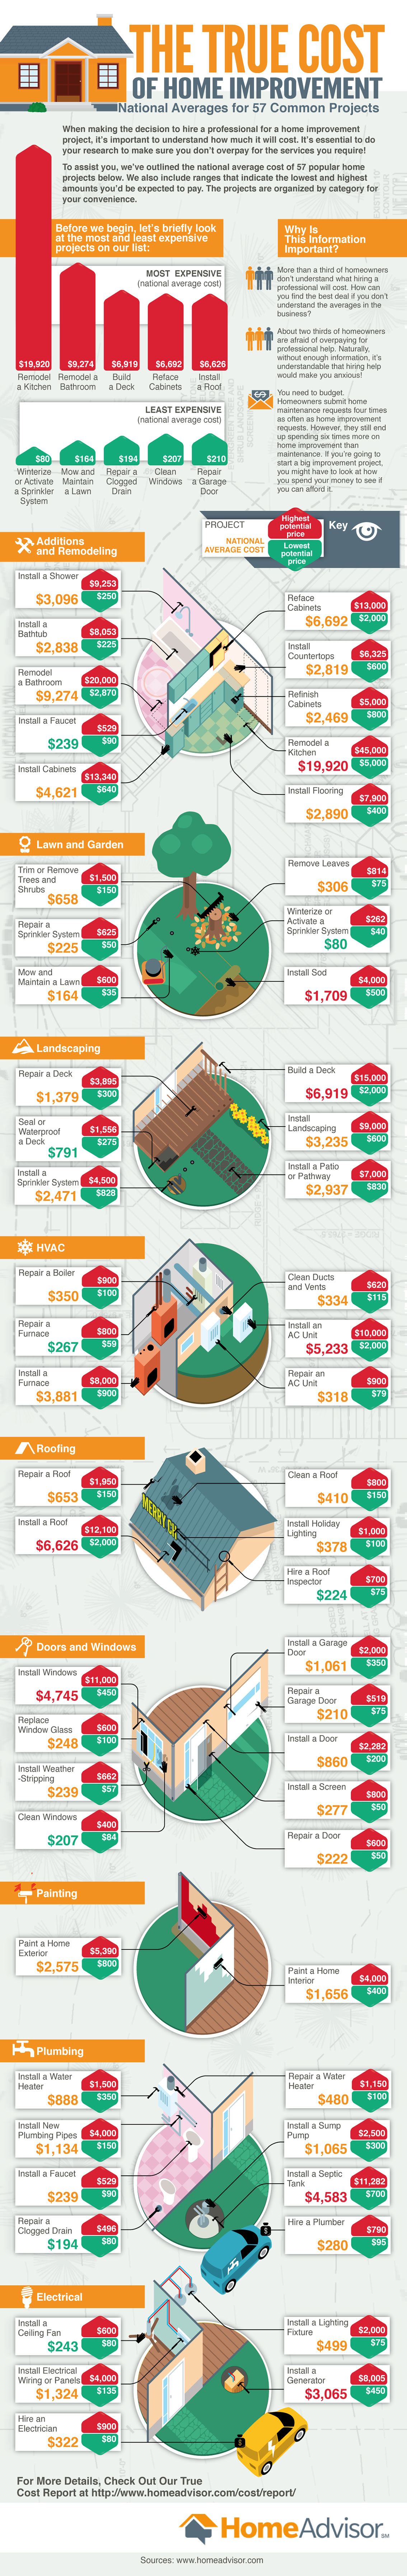 True Cost of Common Home Improvement Projects Infographic